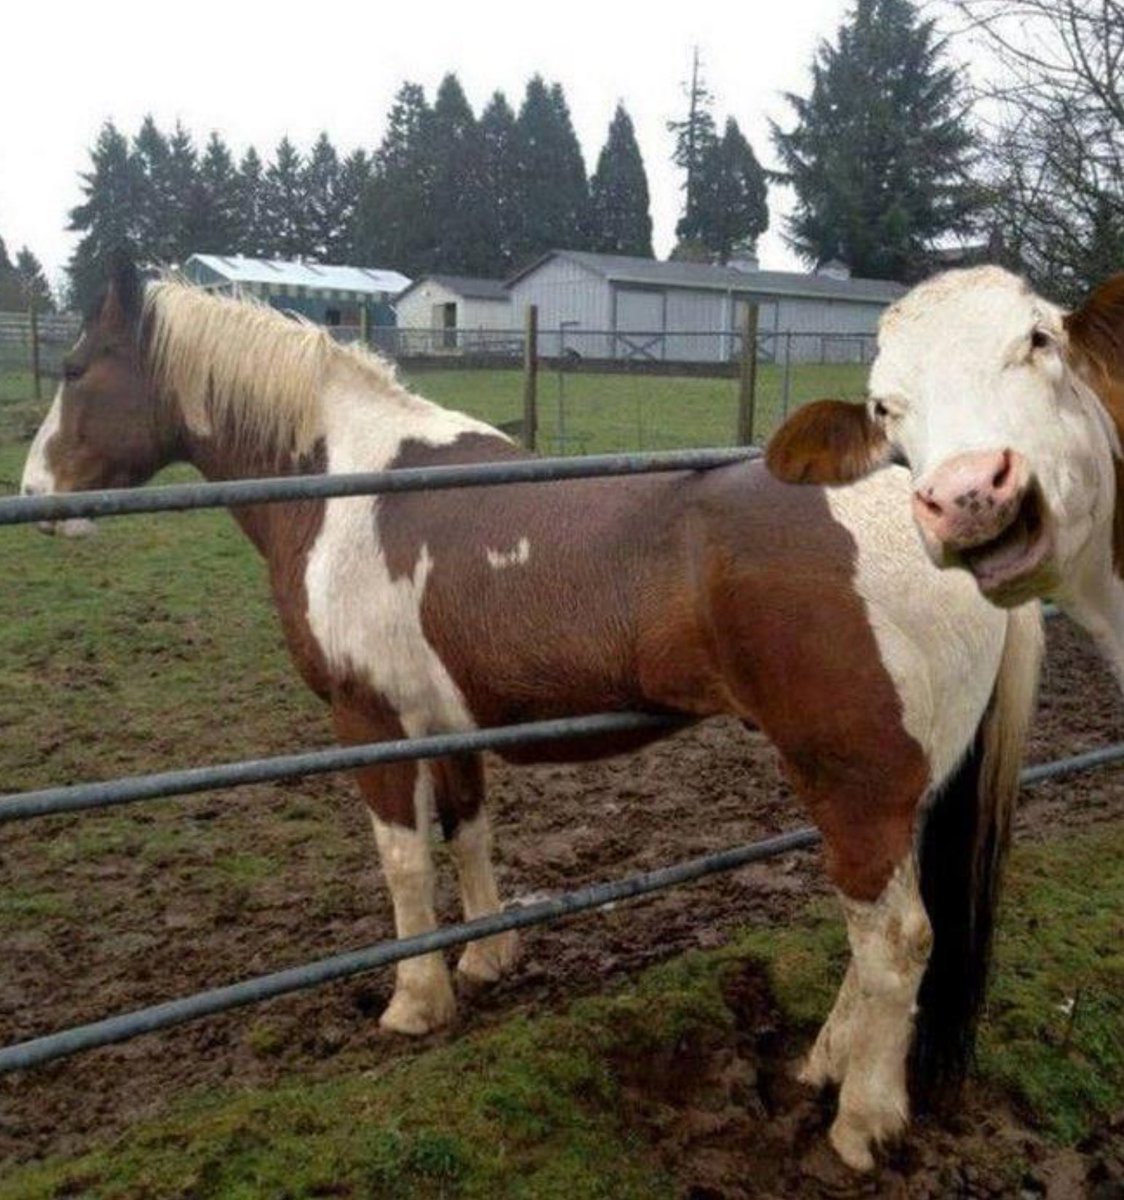 Remember, no matter how bad your day is going, at least you're not in a fence being laughed at by a cow.